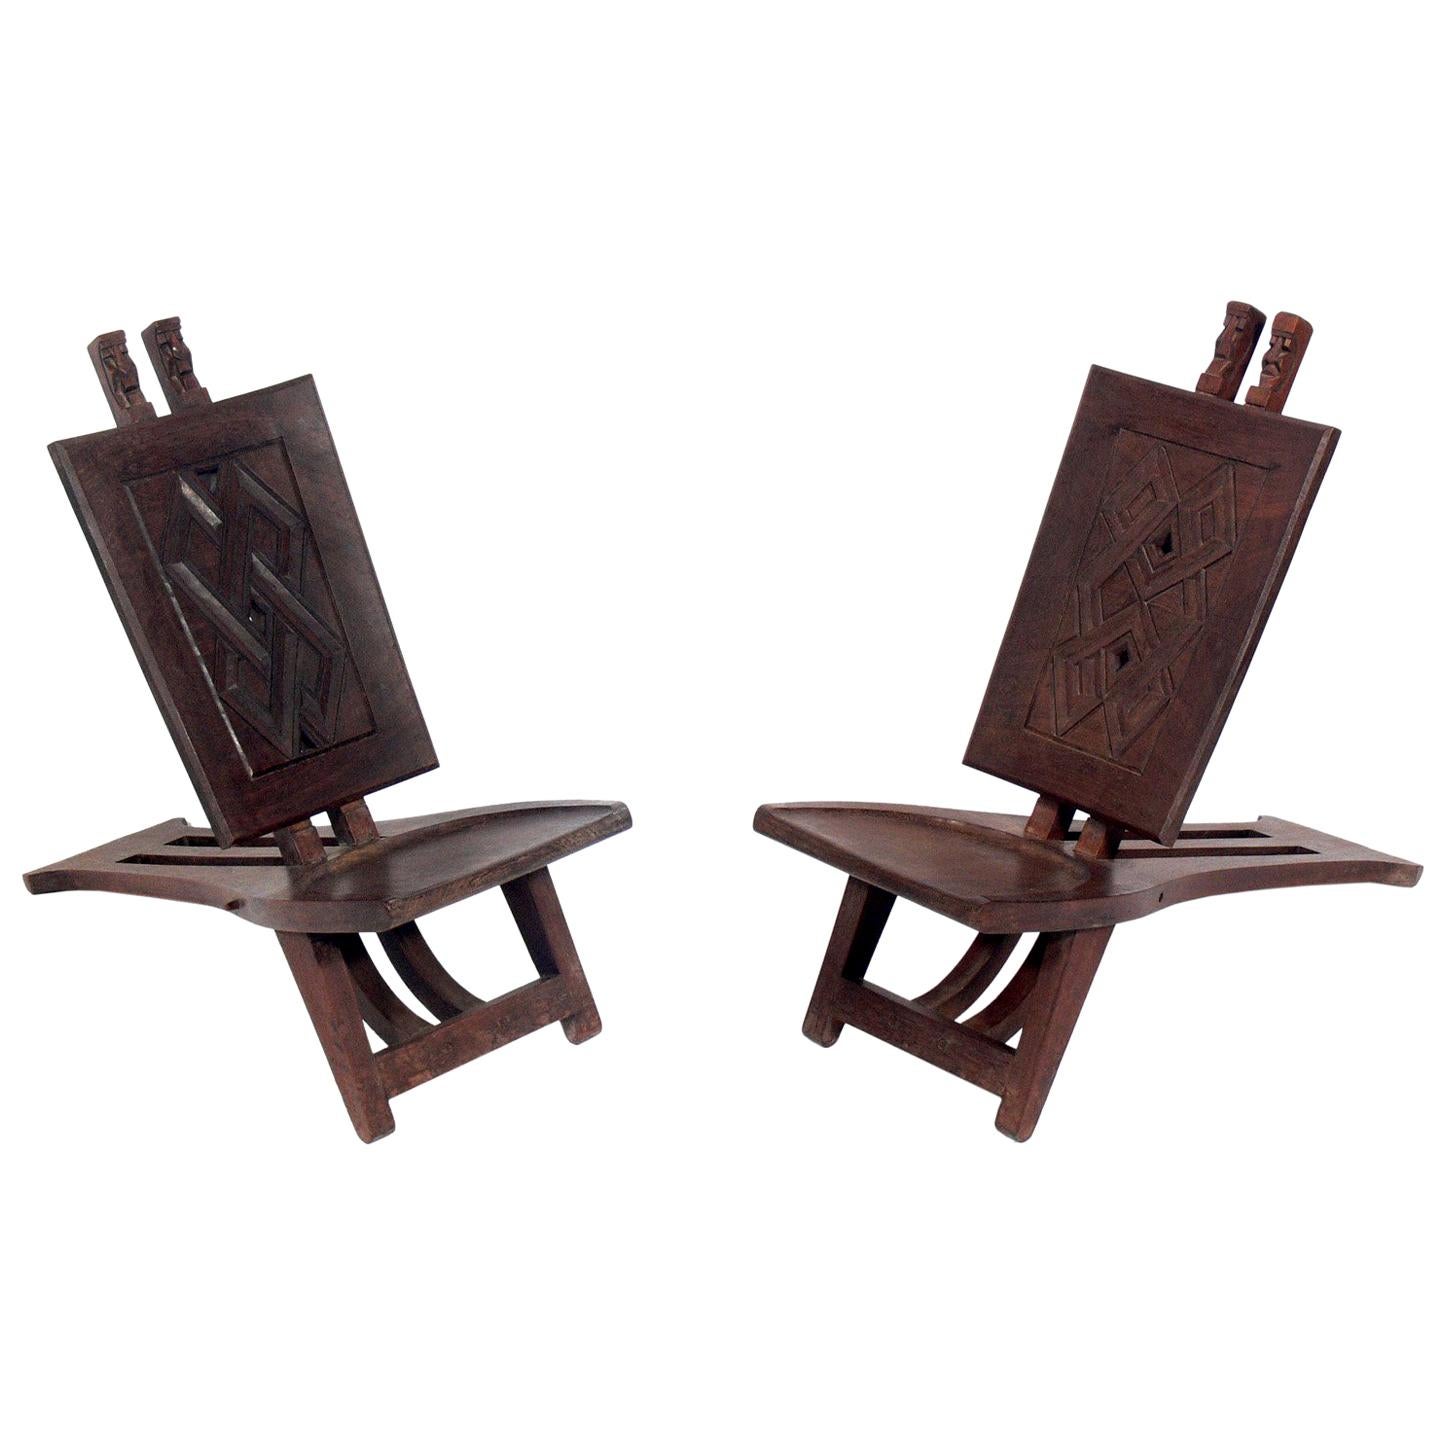 Pair of Low Slung Hand Carved African Lounge Chairs